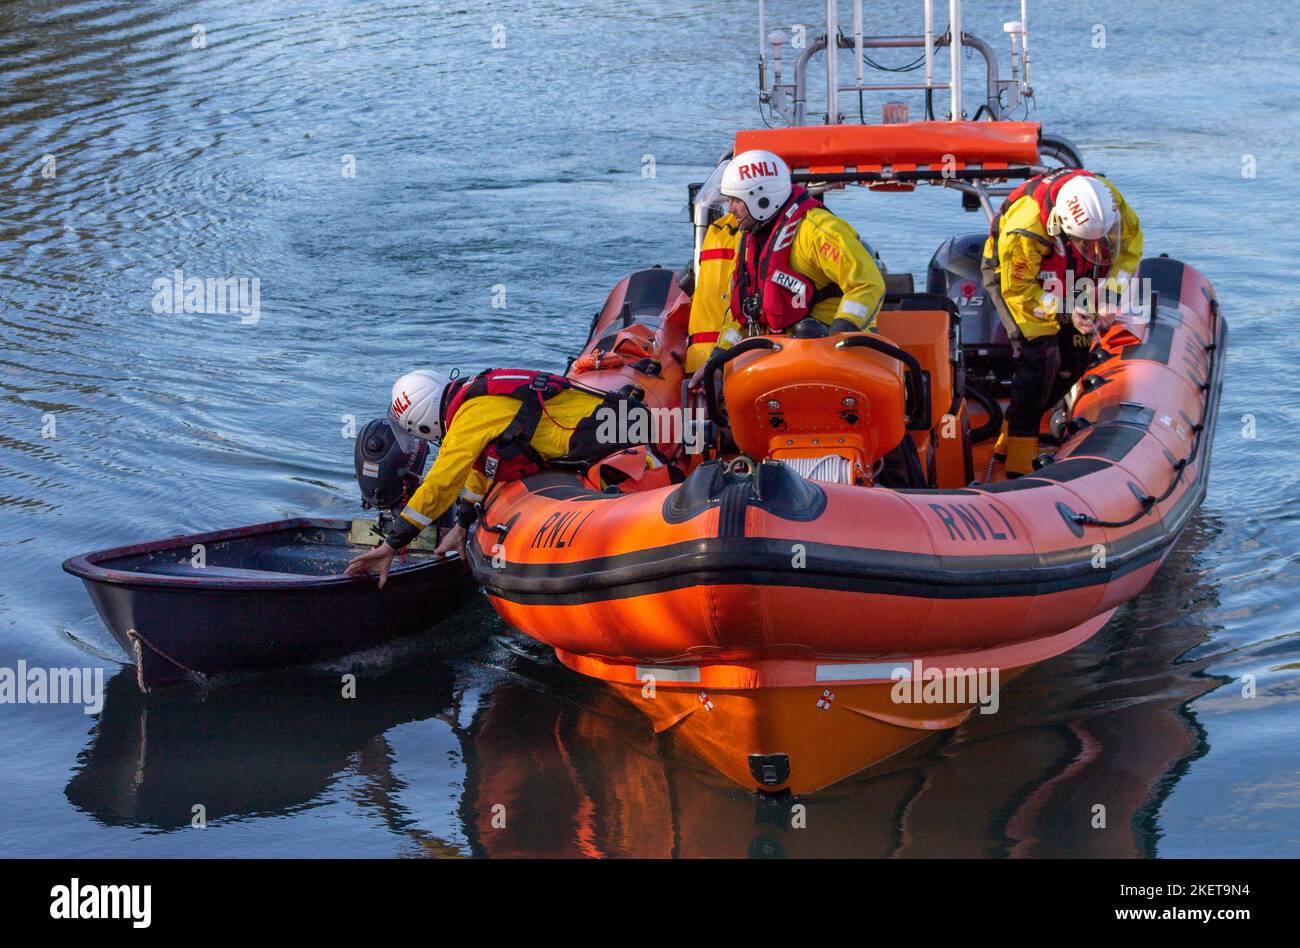 RNLI RIB and Crew Rescuing small boat Stock Photo